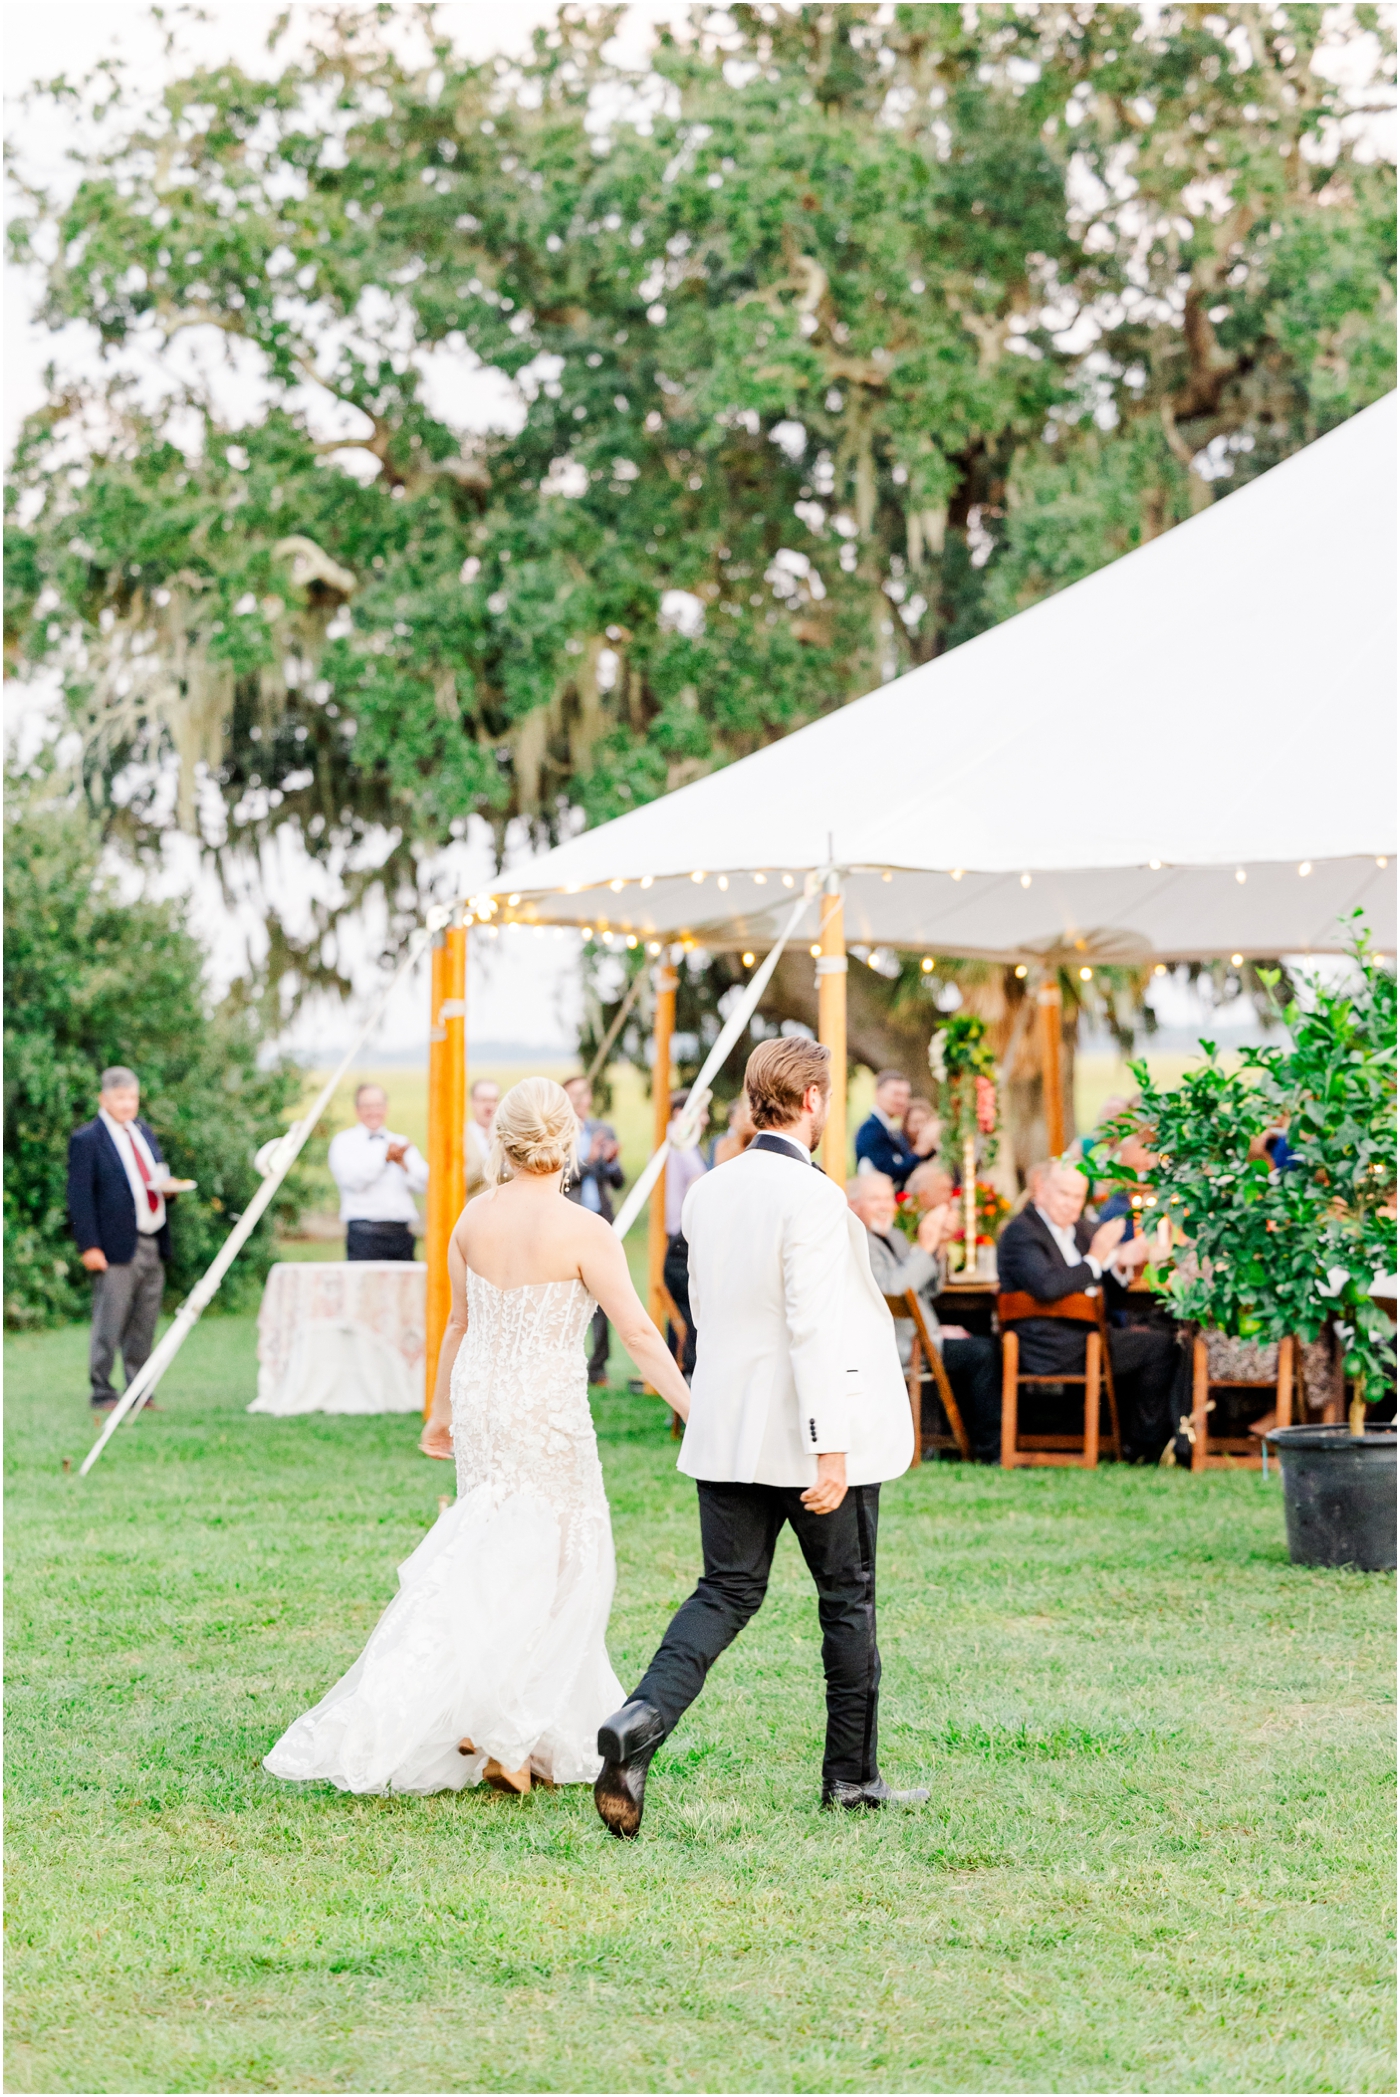 Sailcloth tent reception at an Agapae Oaks wedding in Beaufort, SC